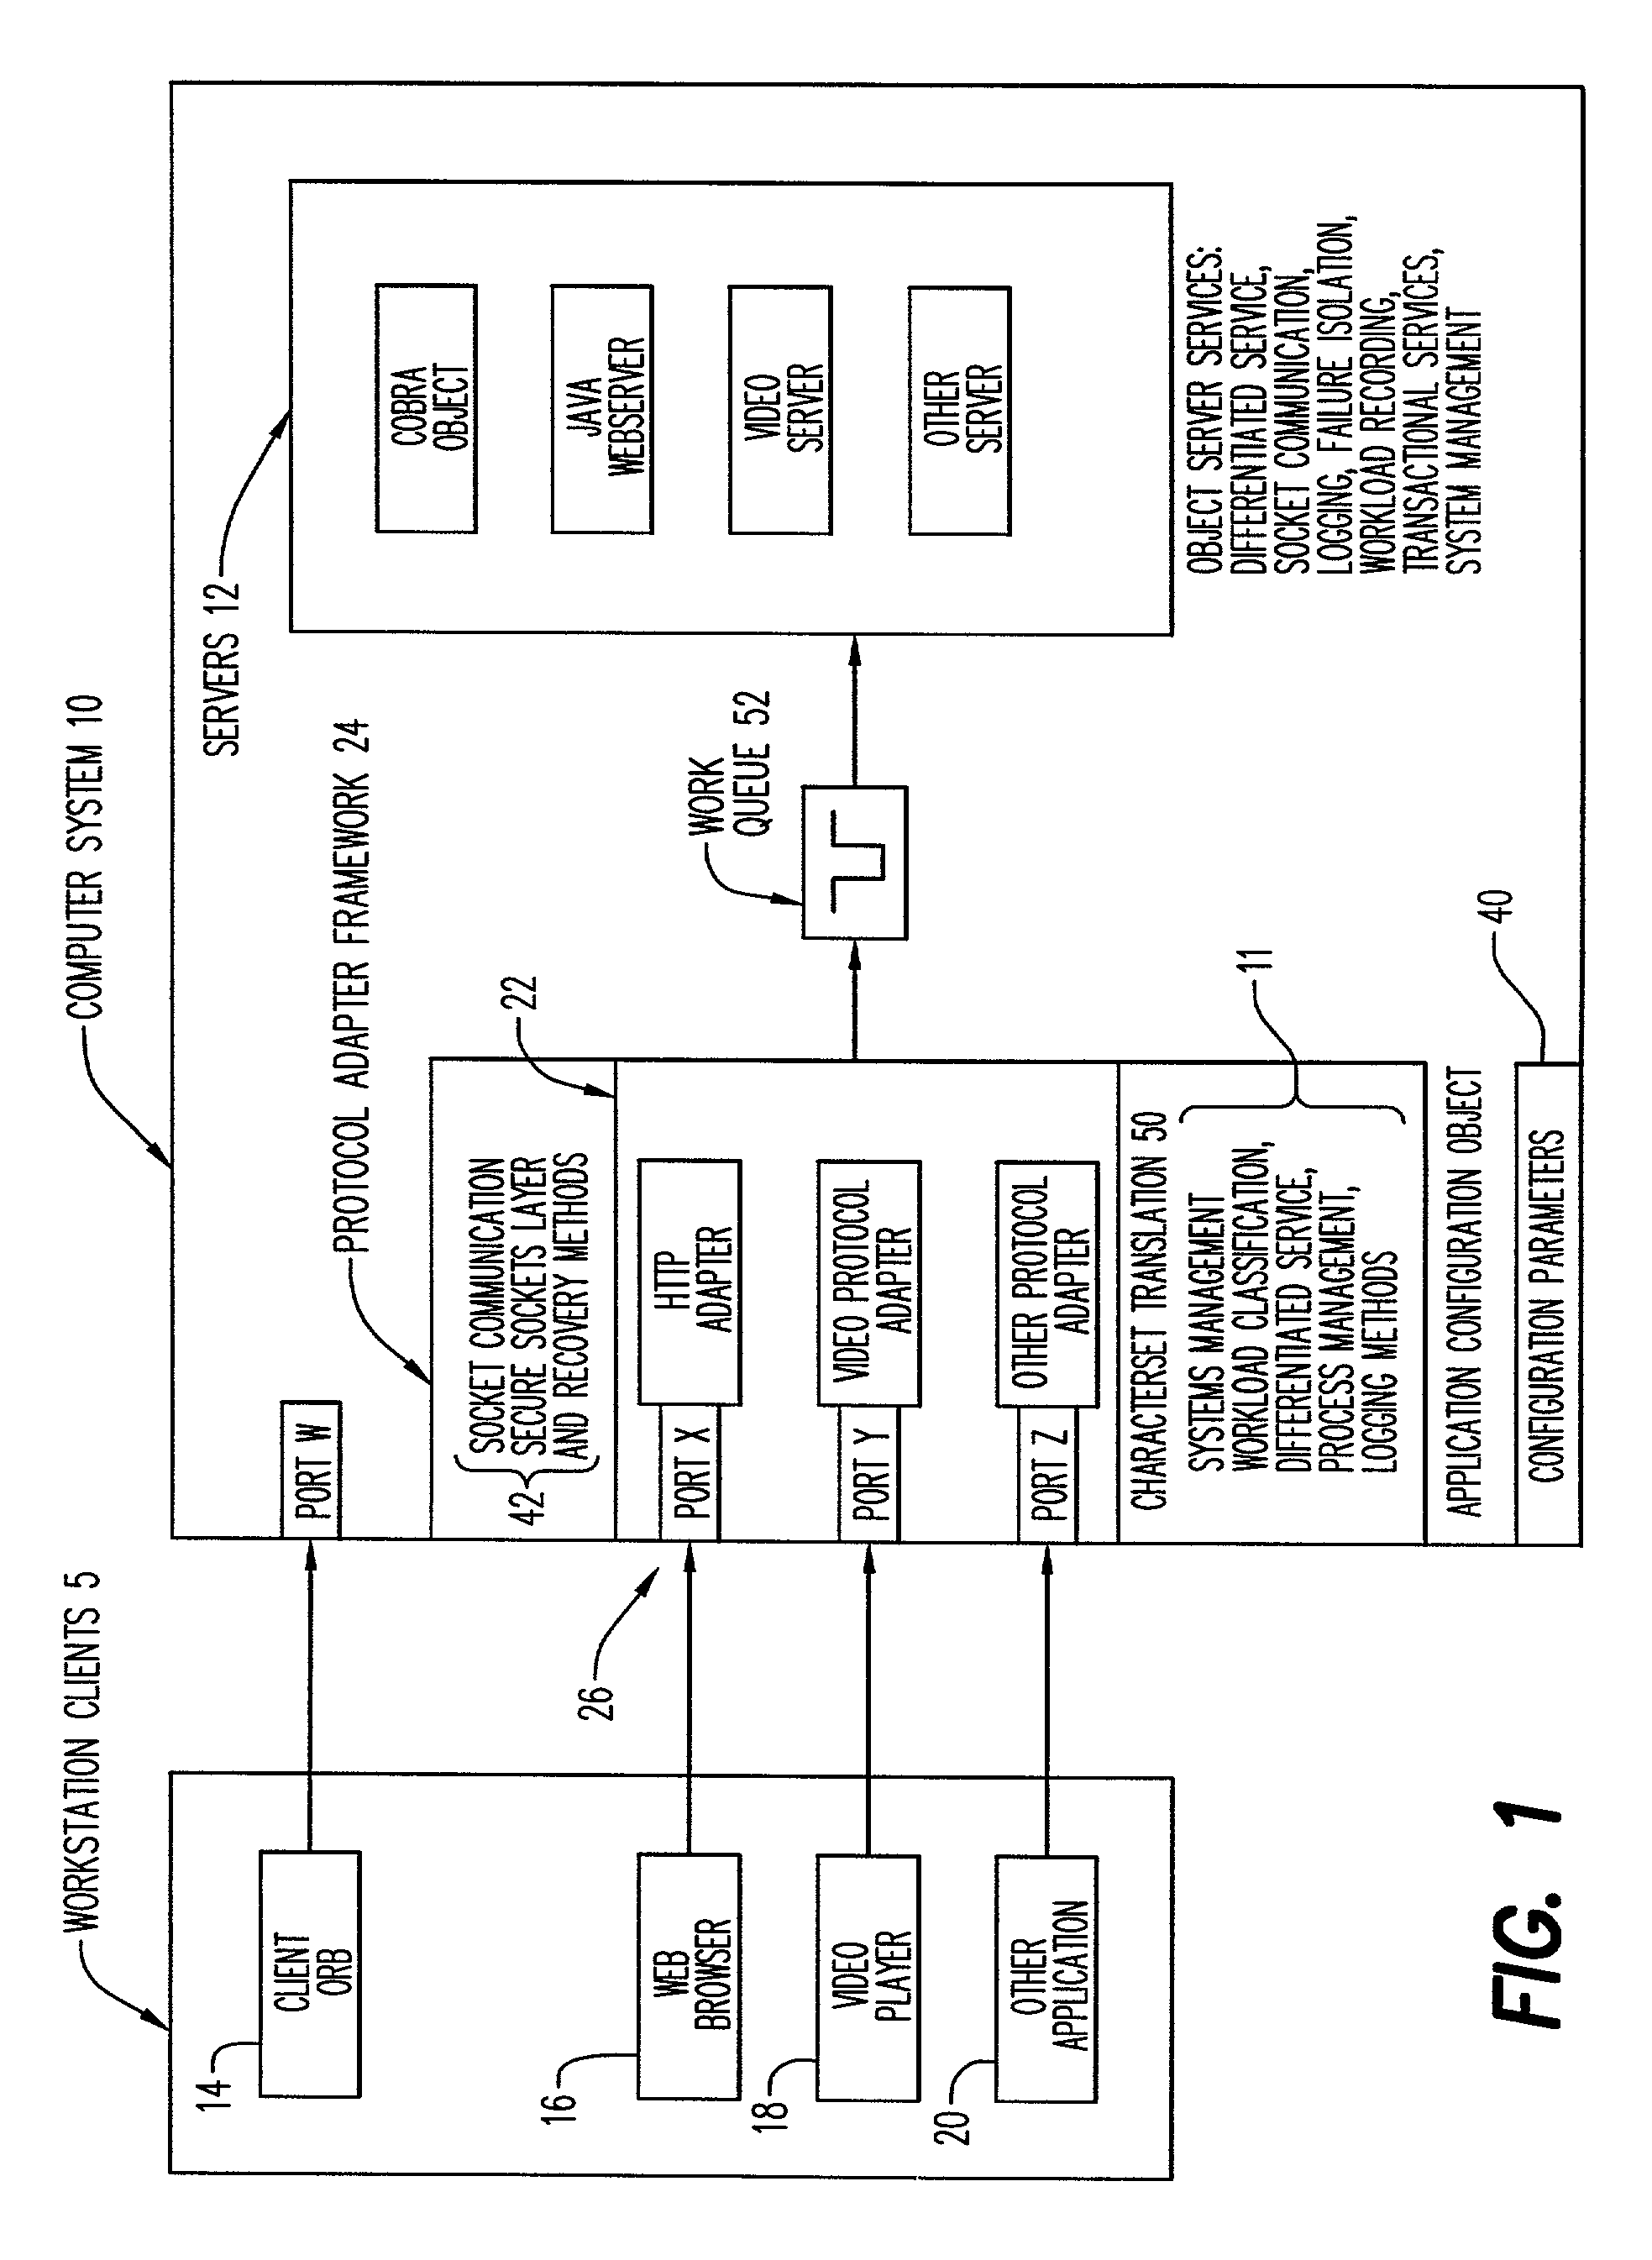 Protocol adapter framework for integrating non-IIOP applications into an object server container